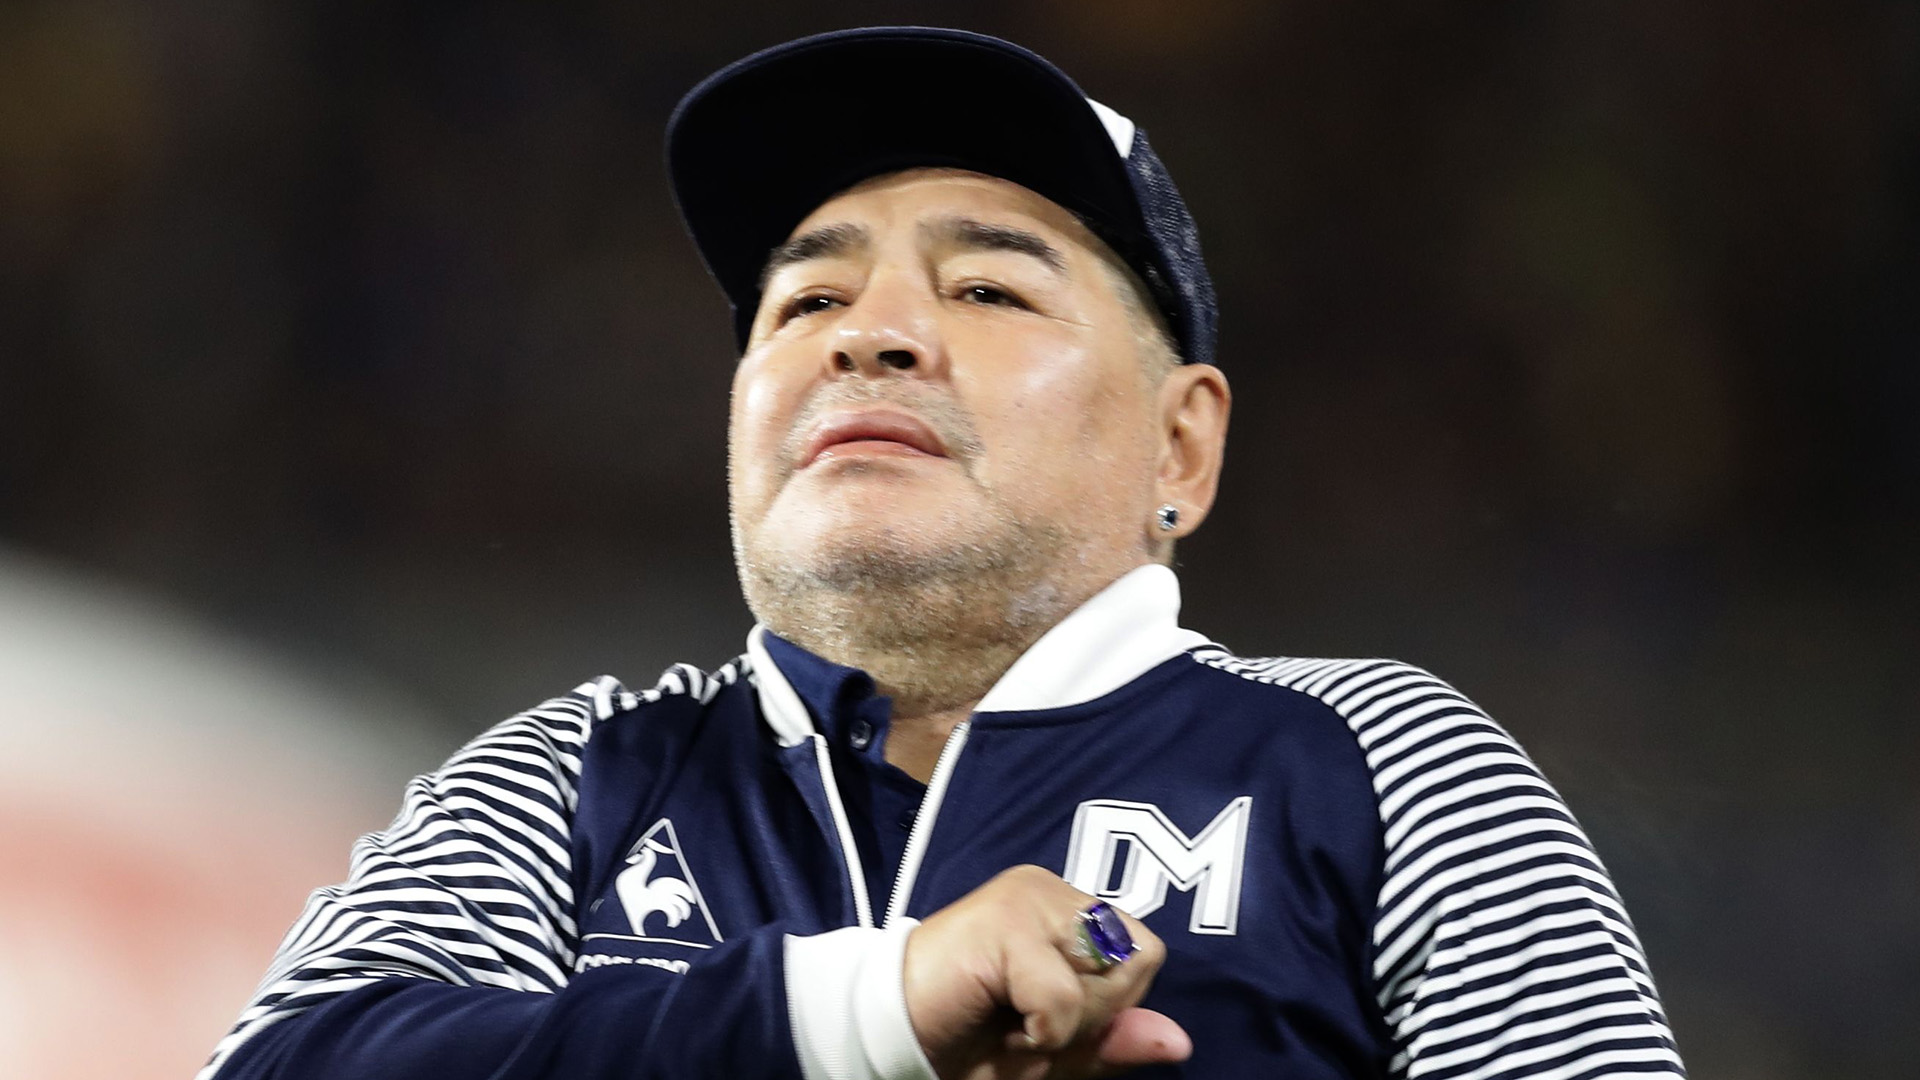 Argentine former football star Diego Maradona acknowledges spectators during an homage before the start of the Argentina First Division 2020 Superliga Tournament football match Boca Juniors vs Gimnasia La Plata, at La Bombonera stadium, in Buenos Aires, on March 7, 2020. (Photo by ALEJANDRO PAGNI / AFP) (Photo by ALEJANDRO PAGNI/AFP via Getty Images)